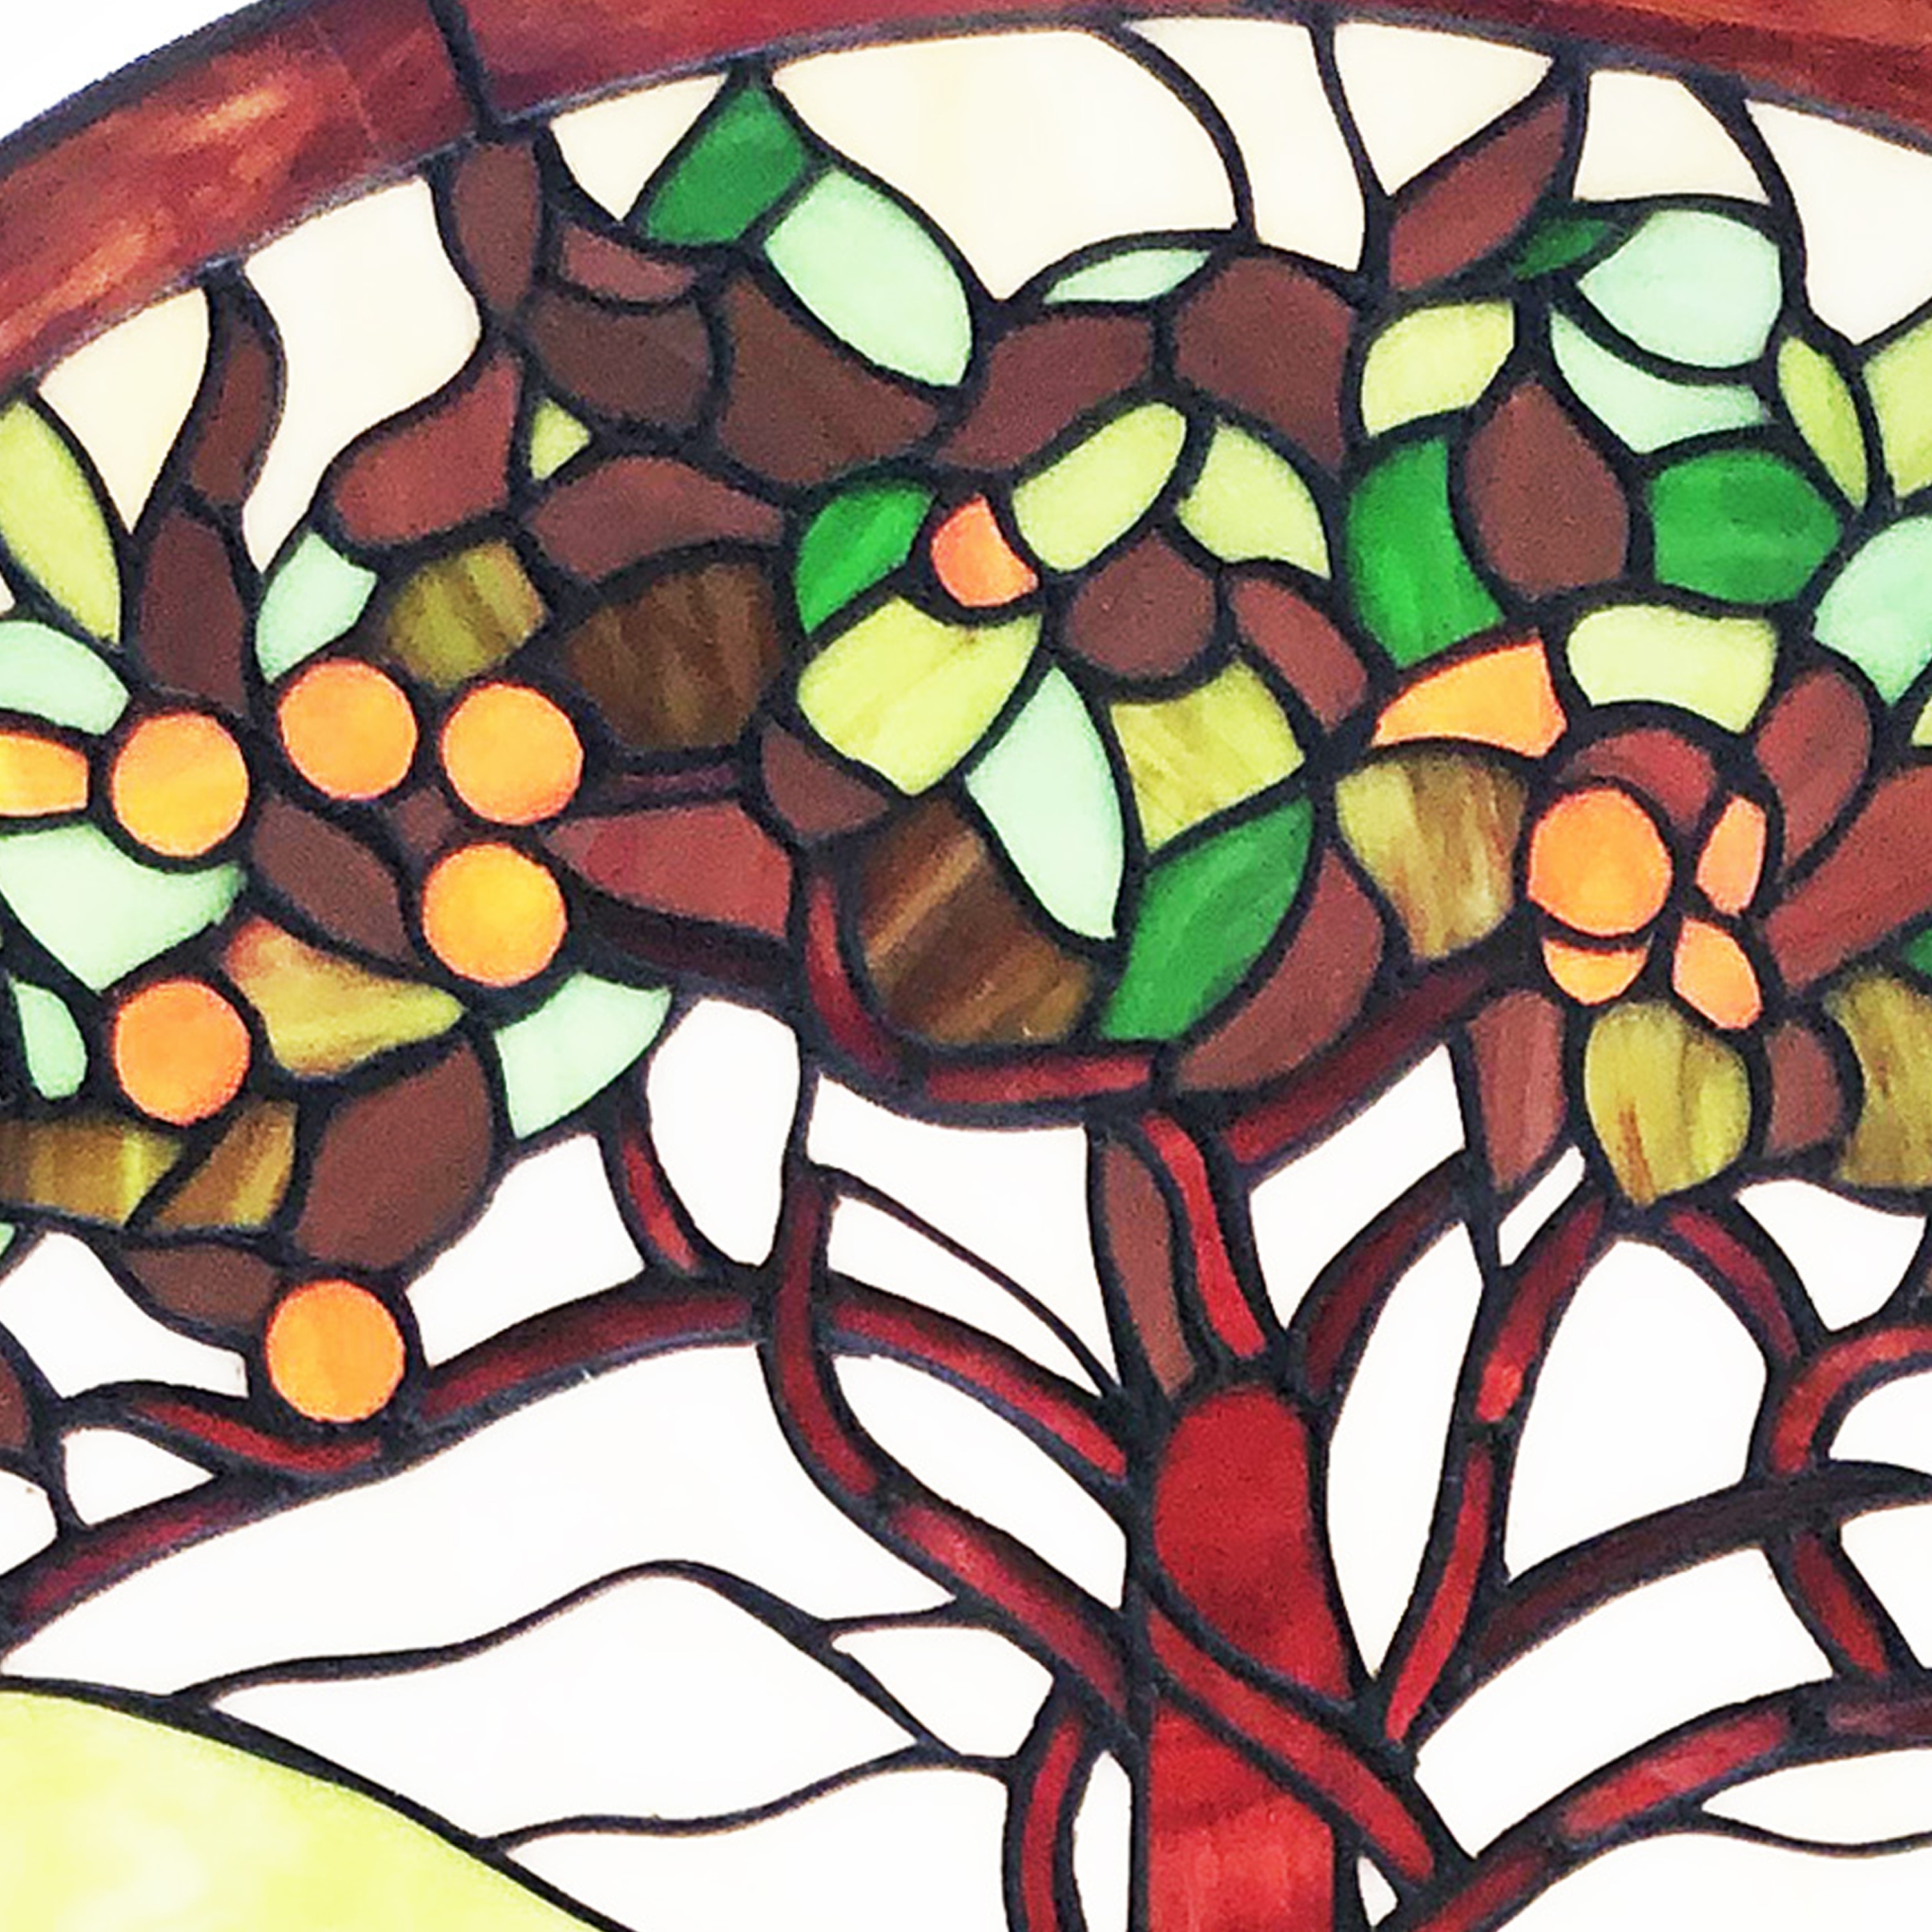 20% OFF Stained Glass Supplies April 1-24 2021